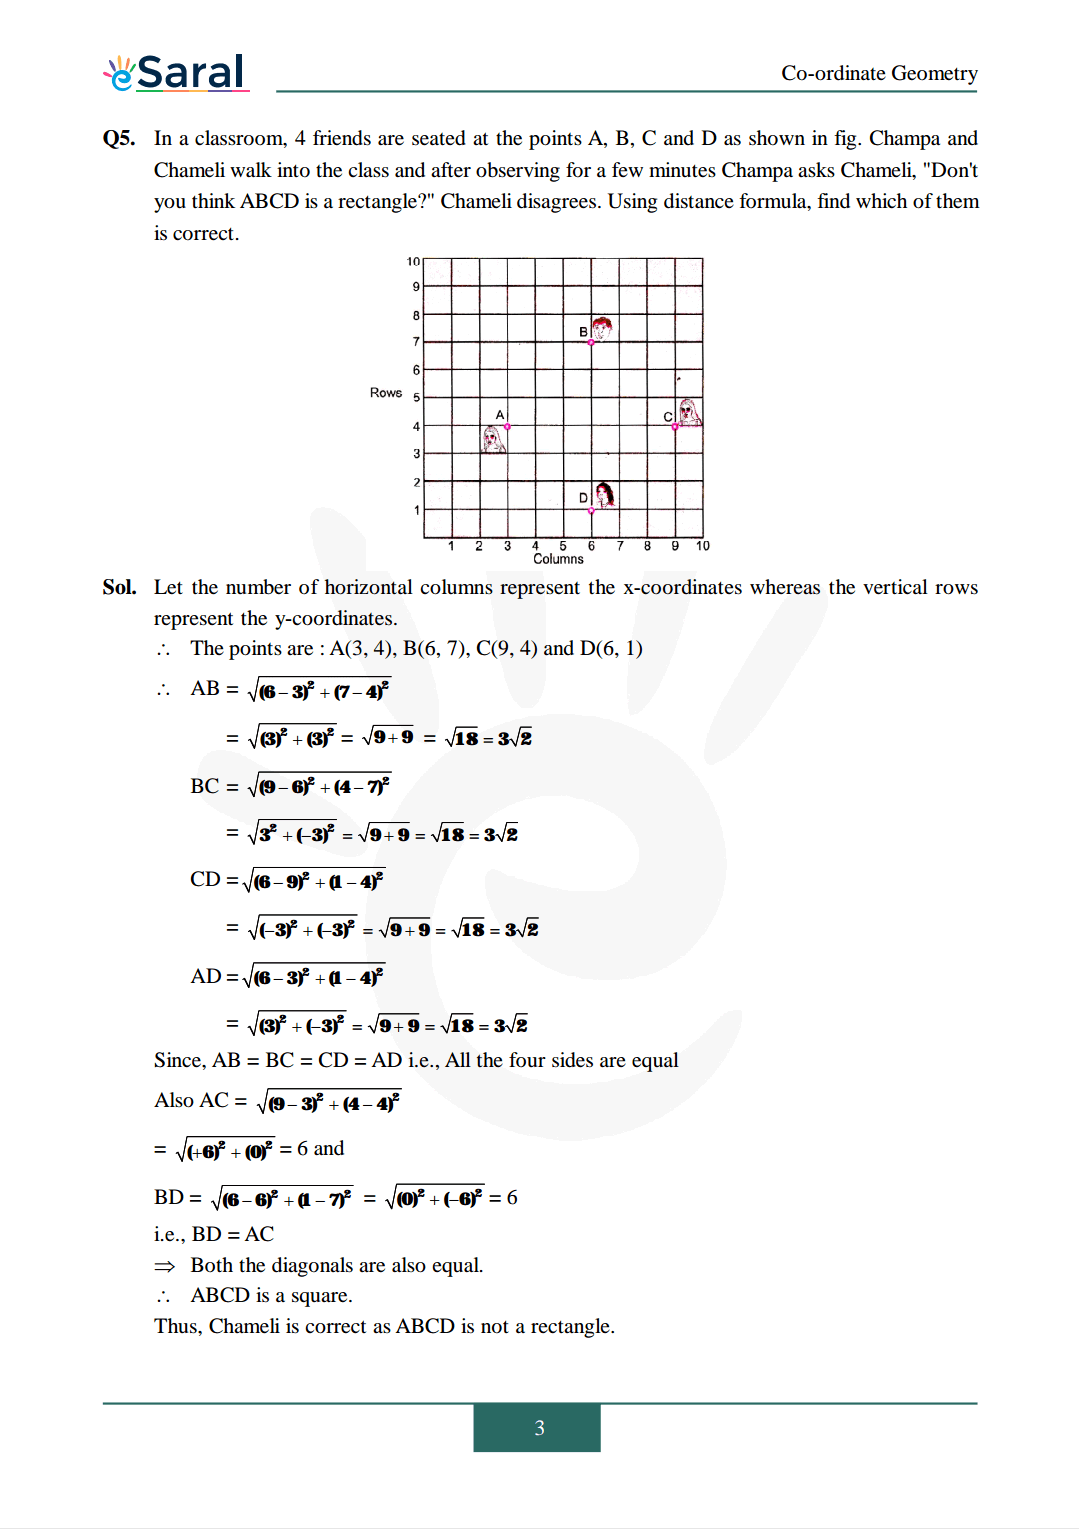 Class 10 Maths Chapter 7 exercise 7.1 solutions Image 3